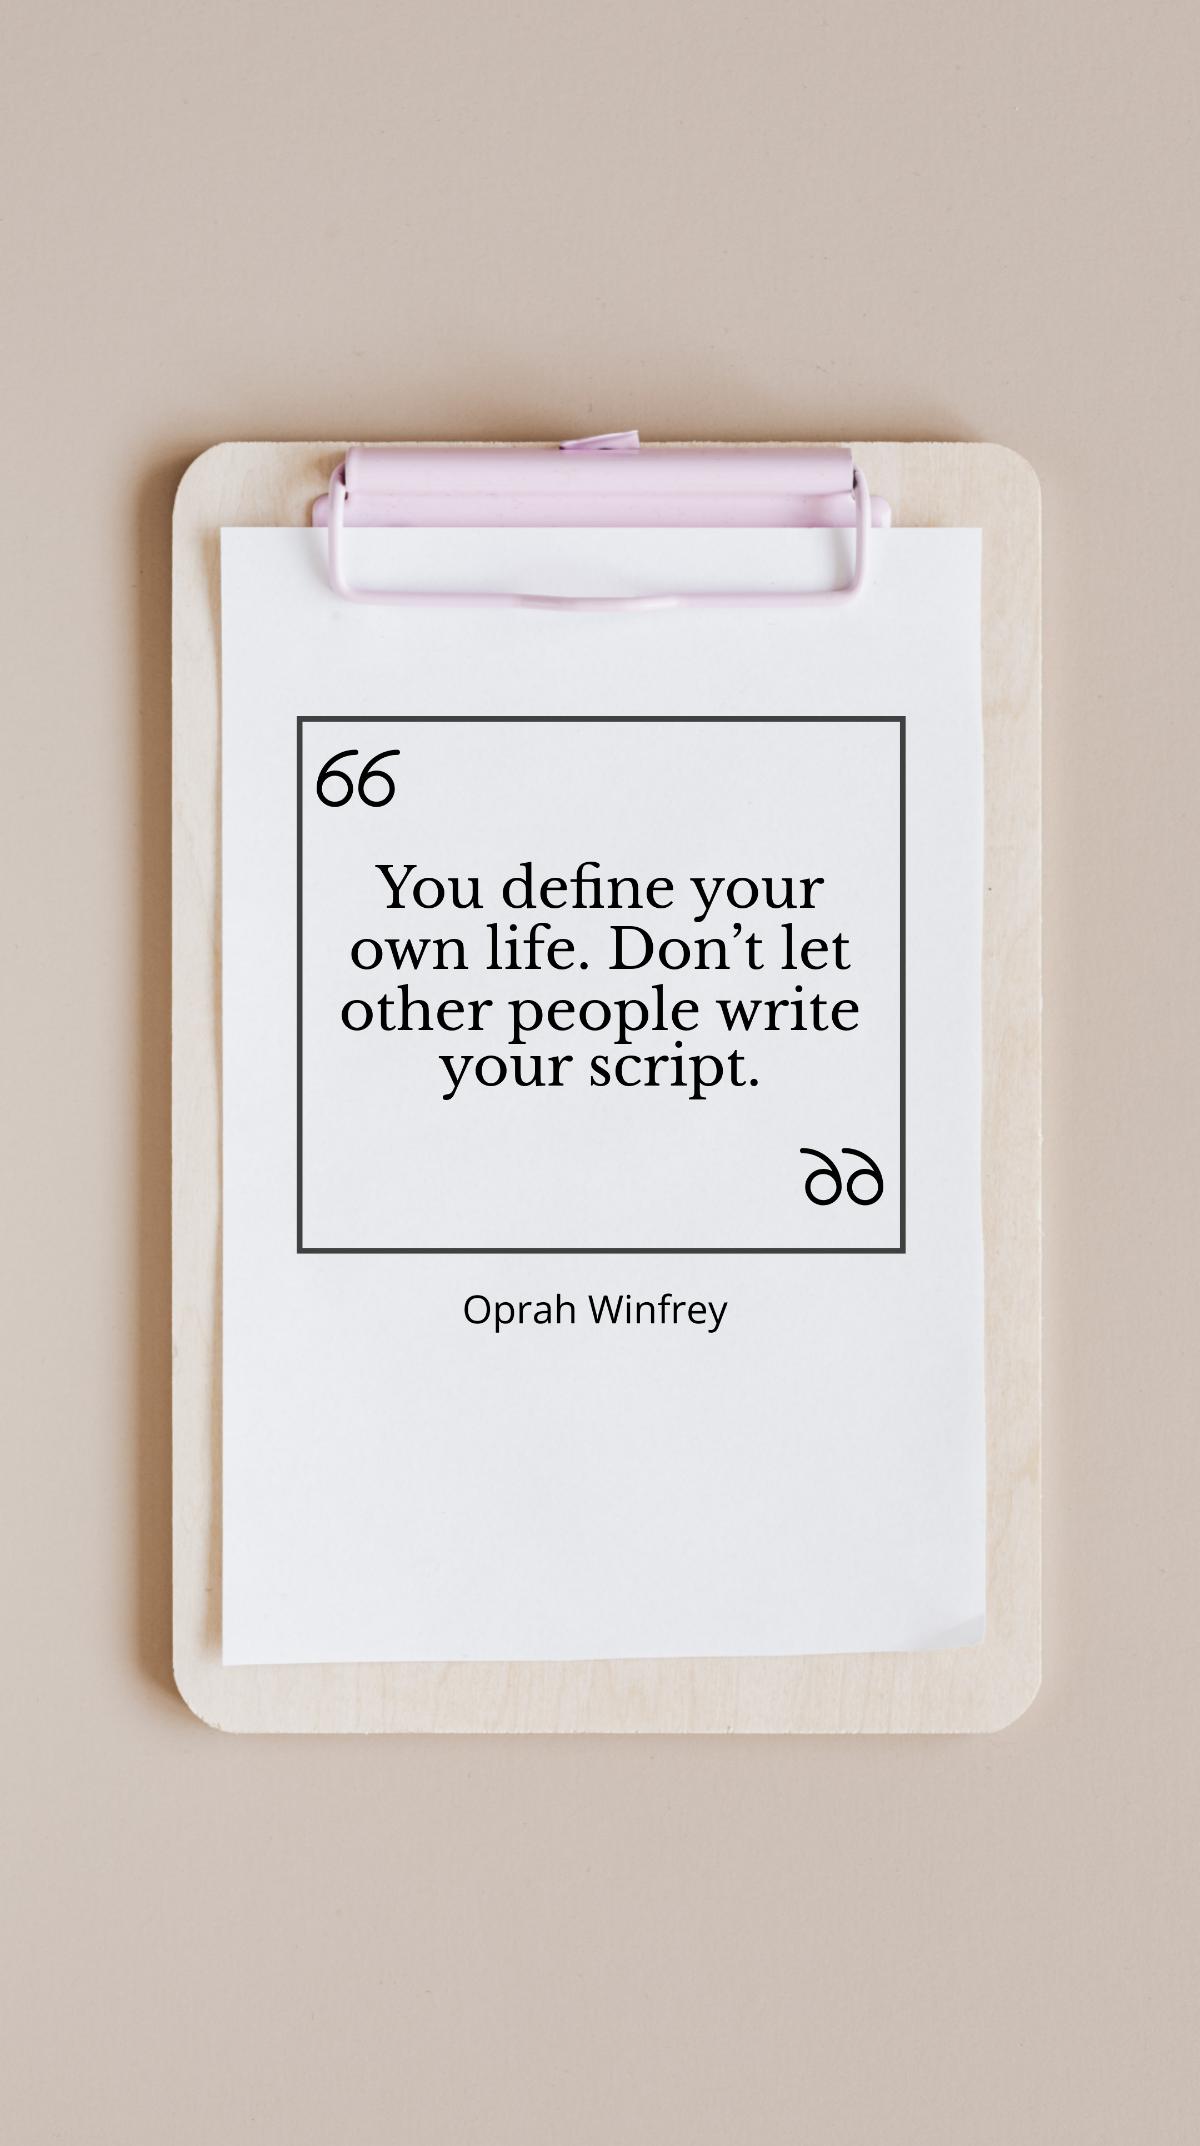 Oprah Winfrey - You define your own life. Don’t let other people write your script Template